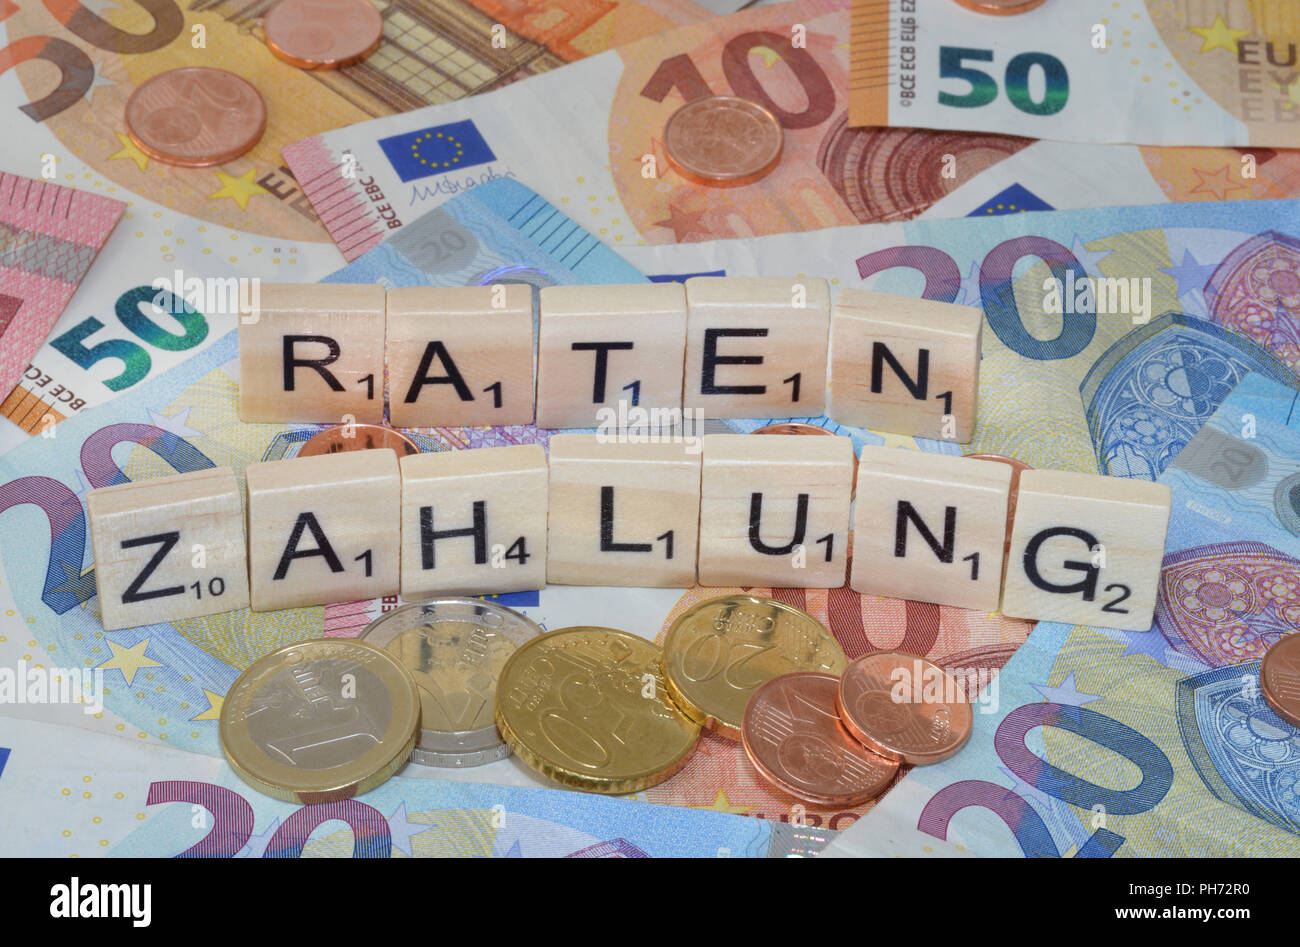 Ratenzahlung High Resolution Stock Photography and Images - Alamy